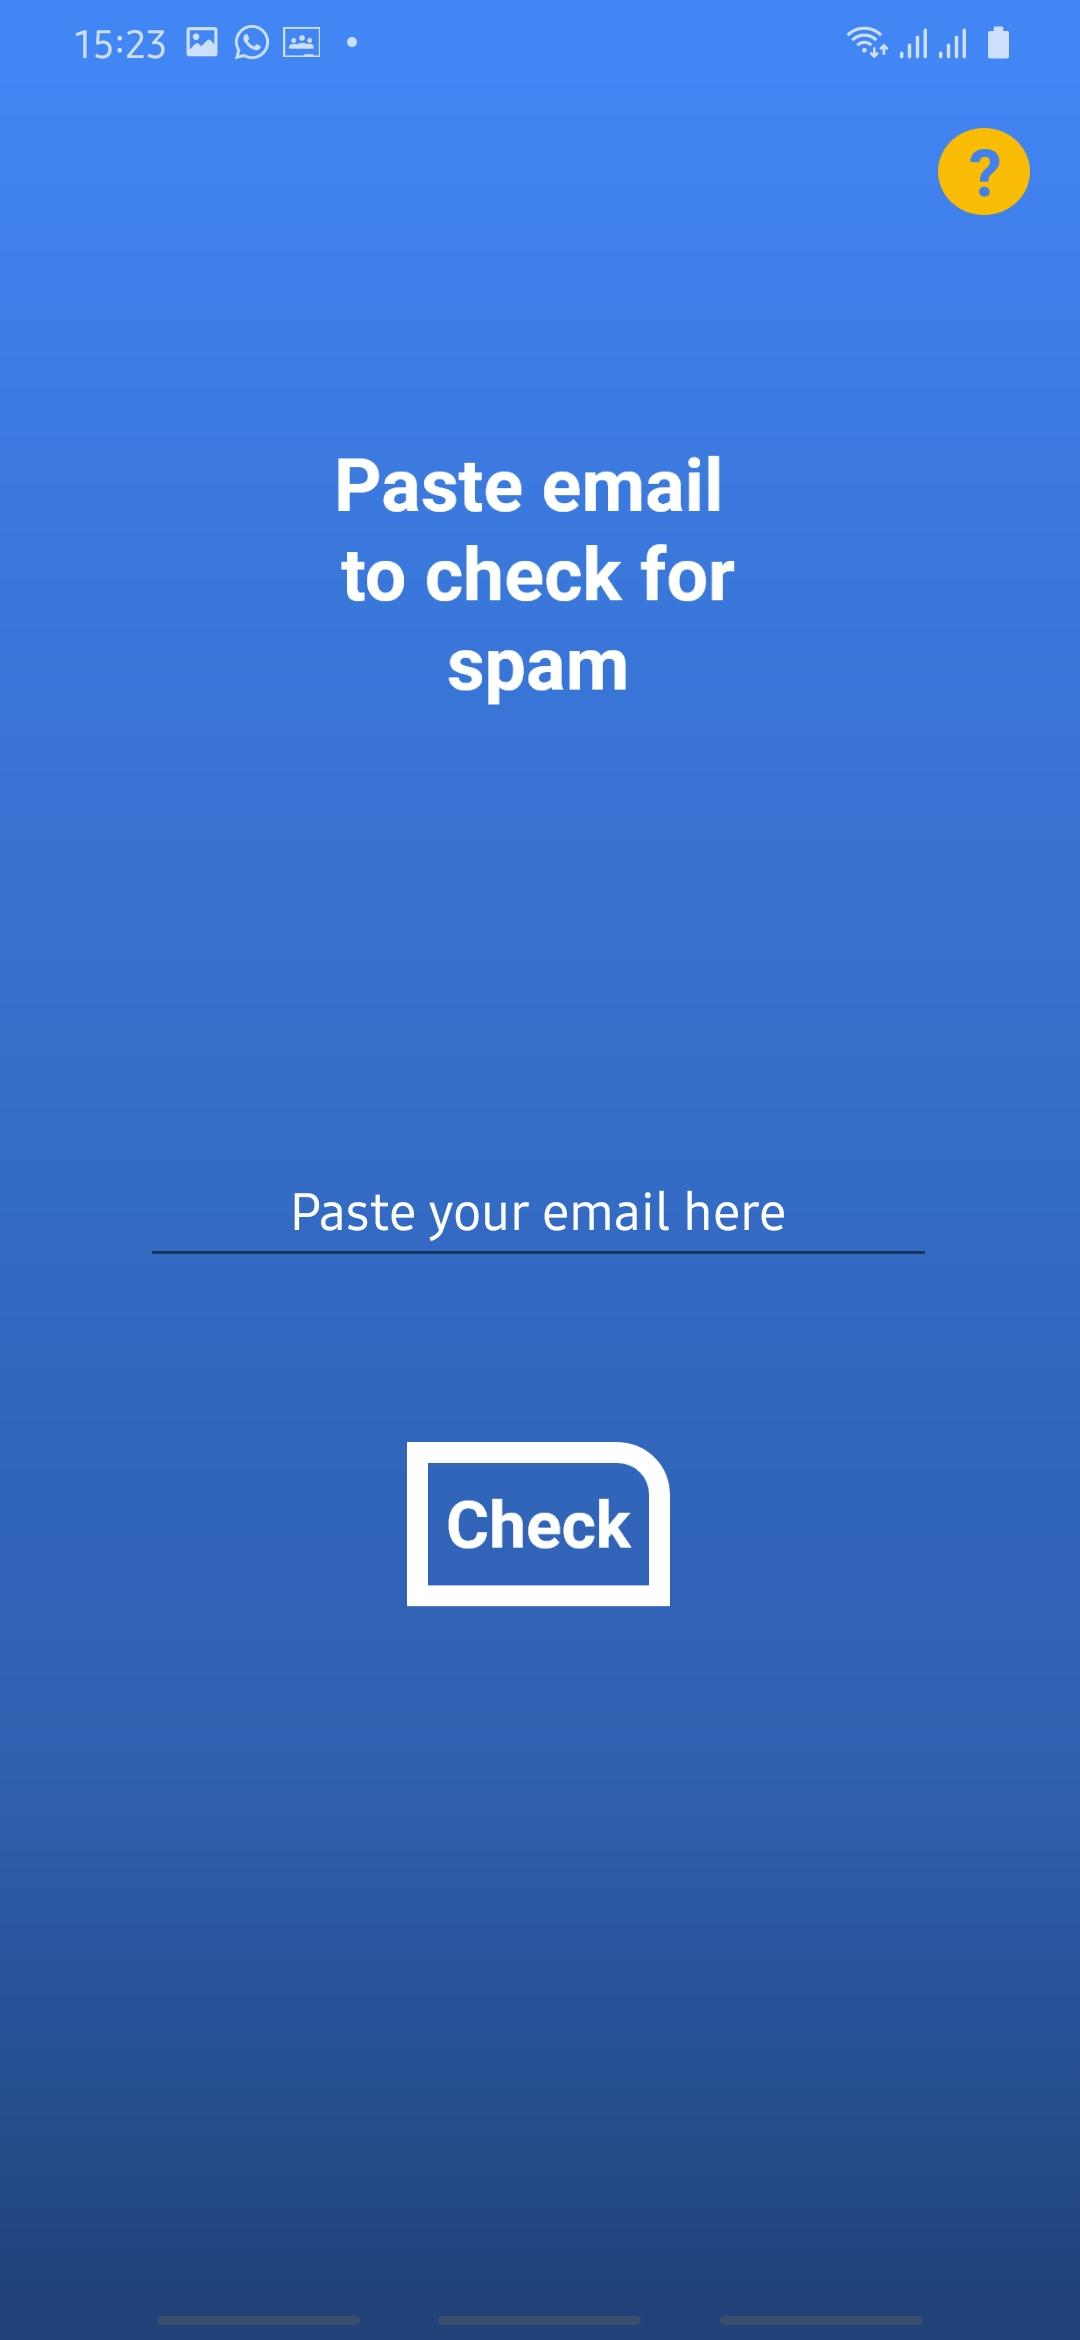 Email Spam Filter for Android - APK Download